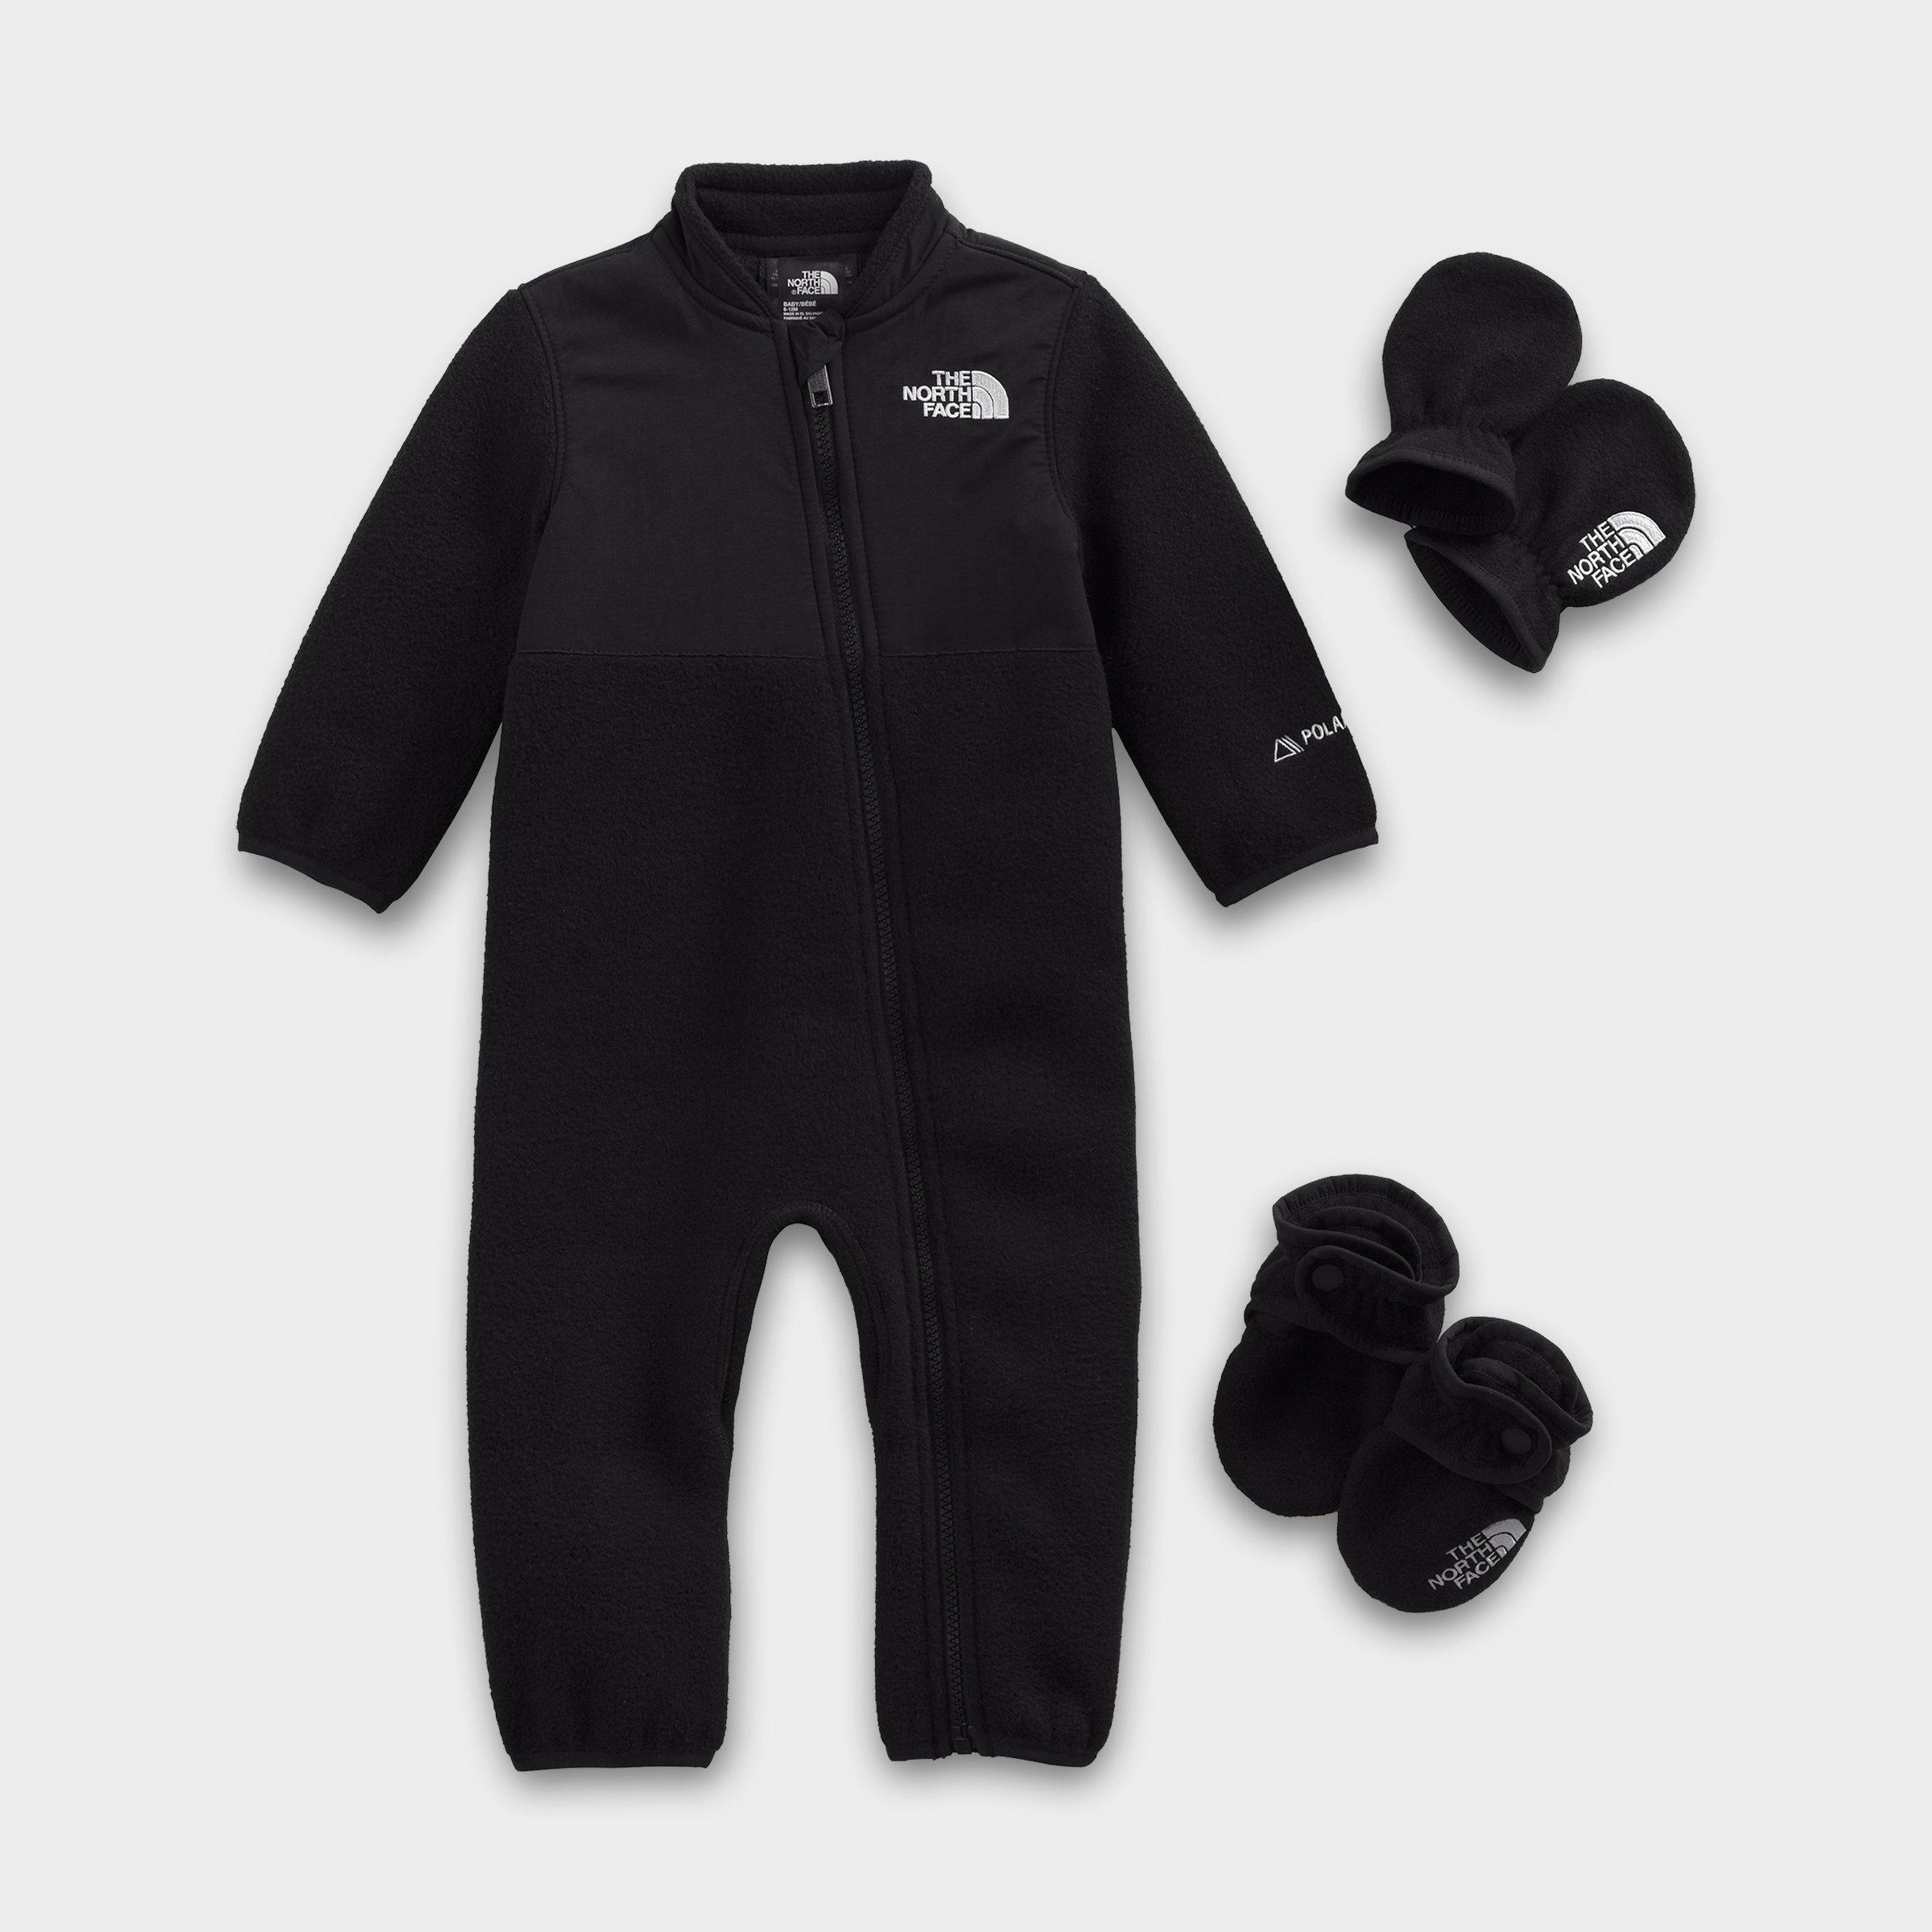 THE NORTH FACE THE NORTH FACE INC INFANT DENALI ONE-PIECE SET